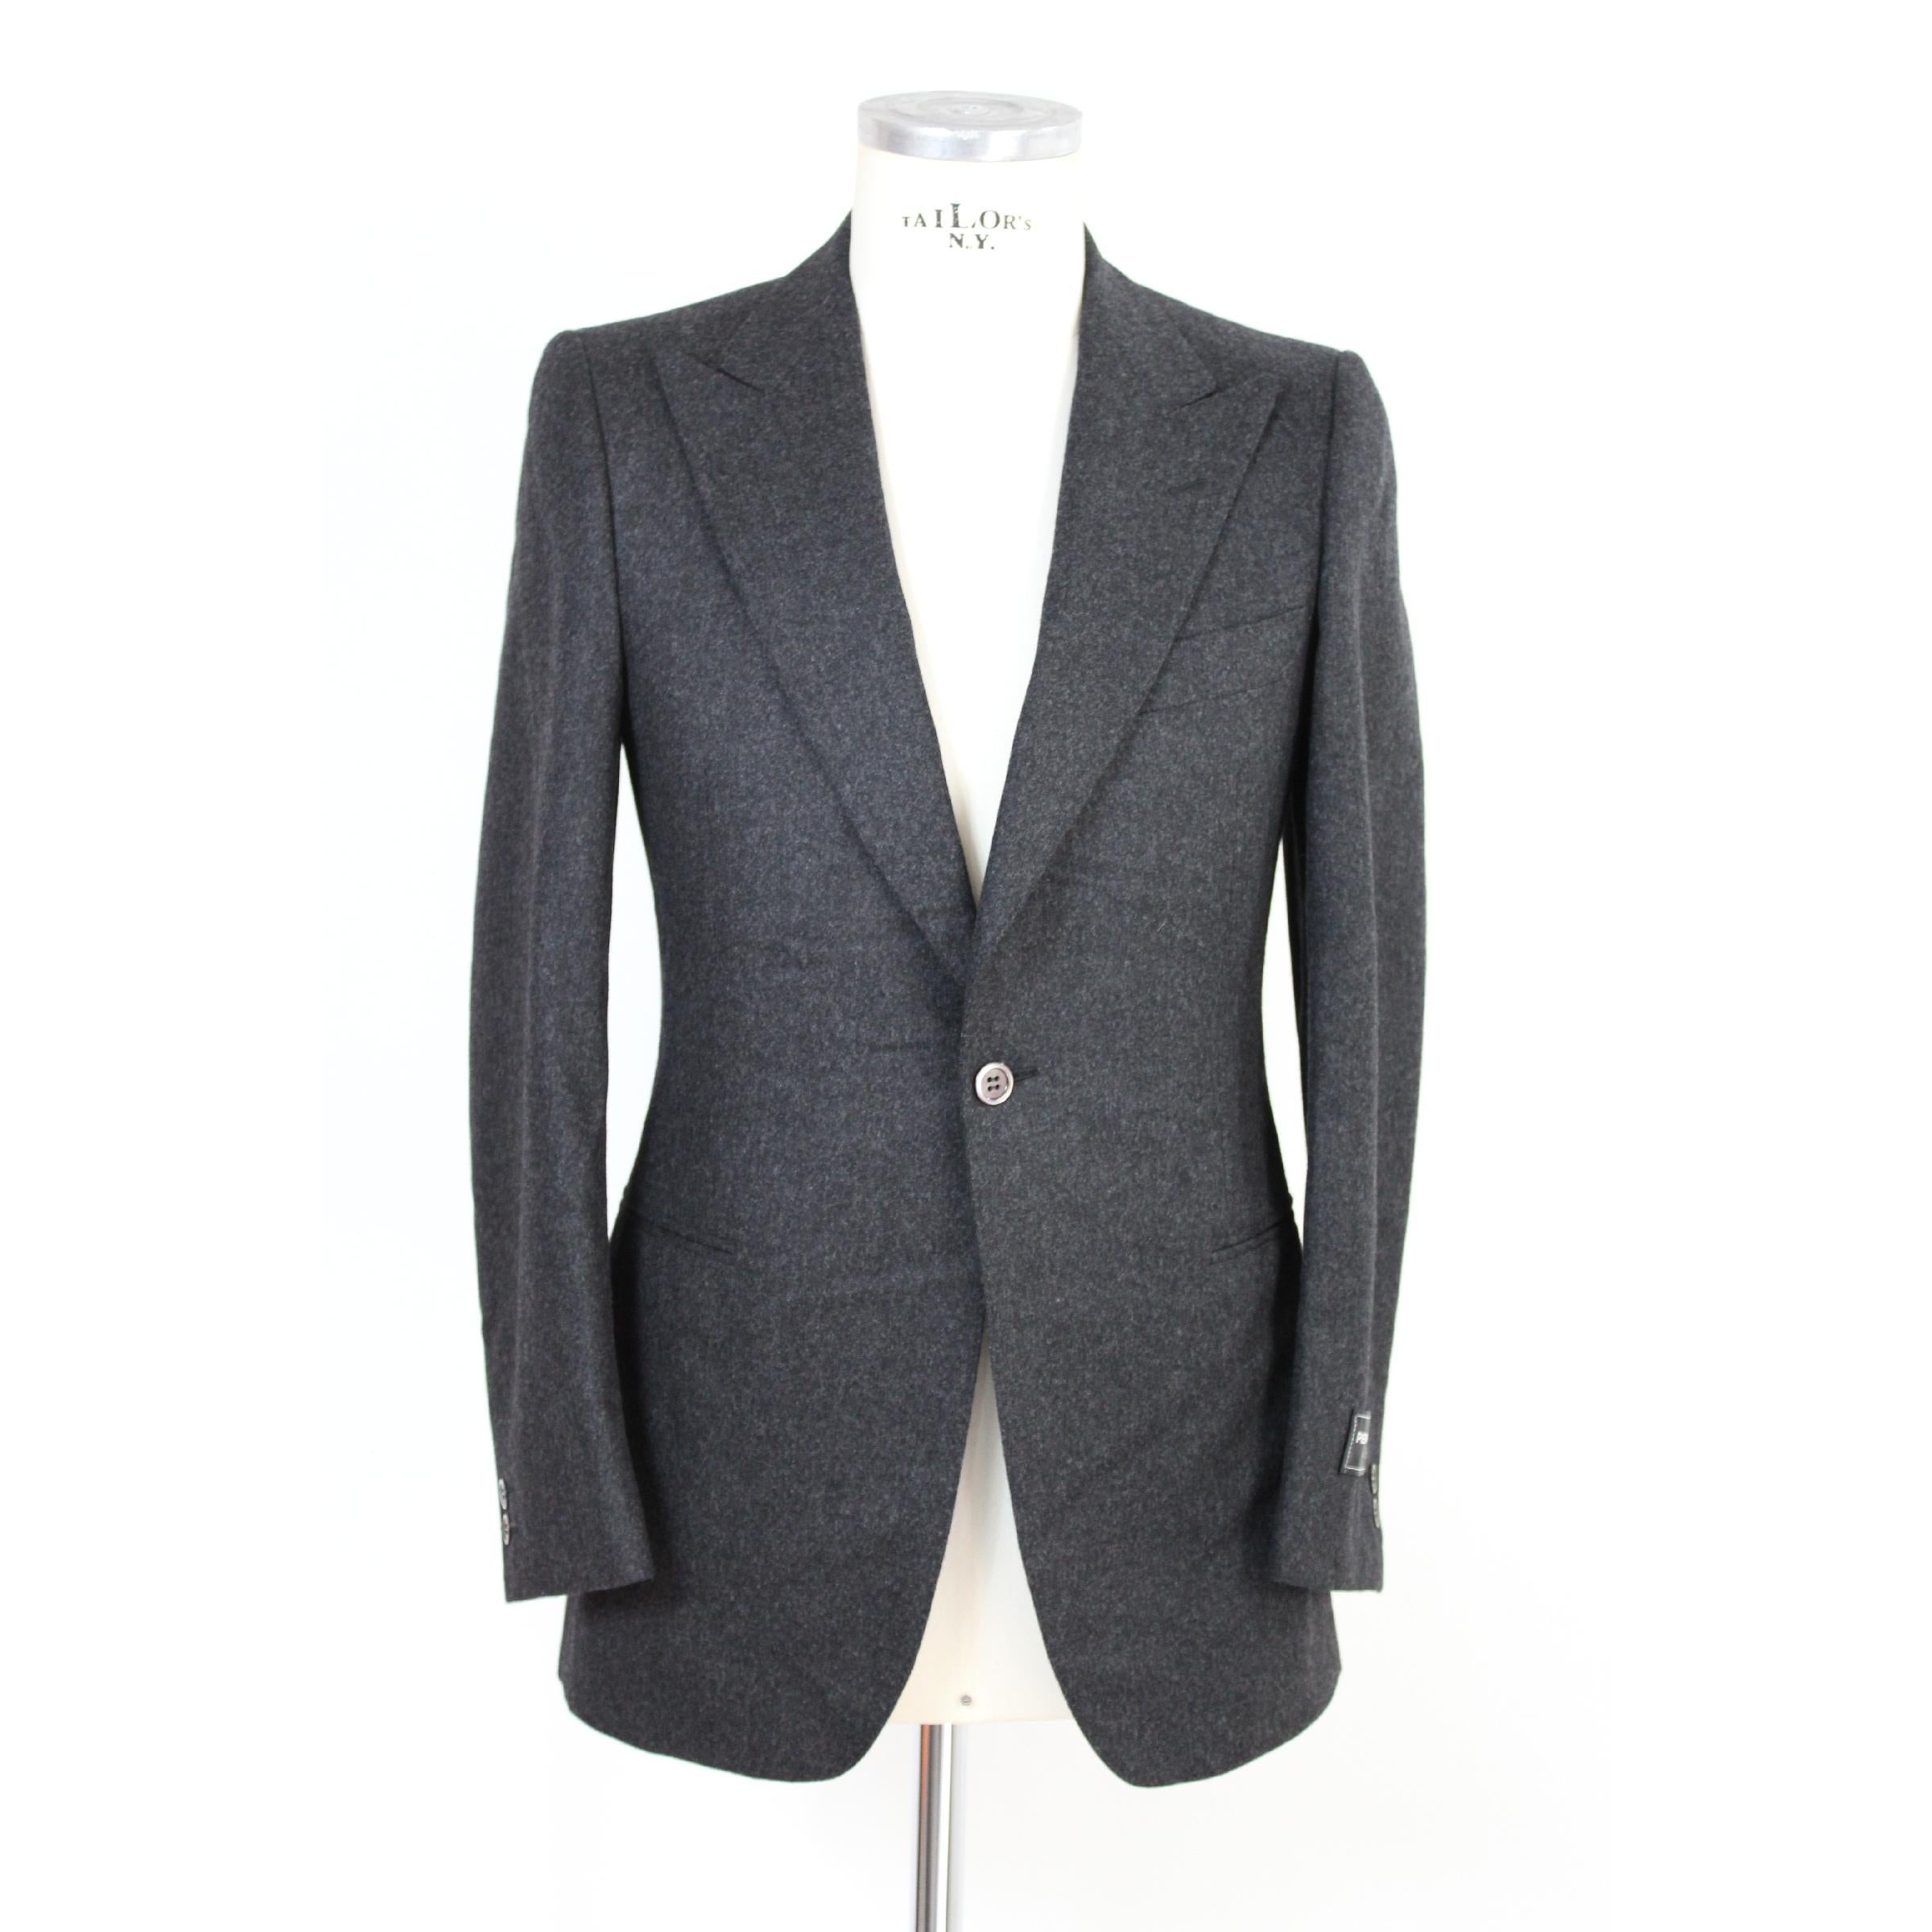 Pierre Cardin vintage tuxedo suit 1990s. Gray and black color. Jacket with one button in dark gray. Gray and black fantasy trousers, two side pockets and button closure. Made in Italy. New without label. 

Size 46 It 36 Us 36 Uk 

Shoulder: 46 cm